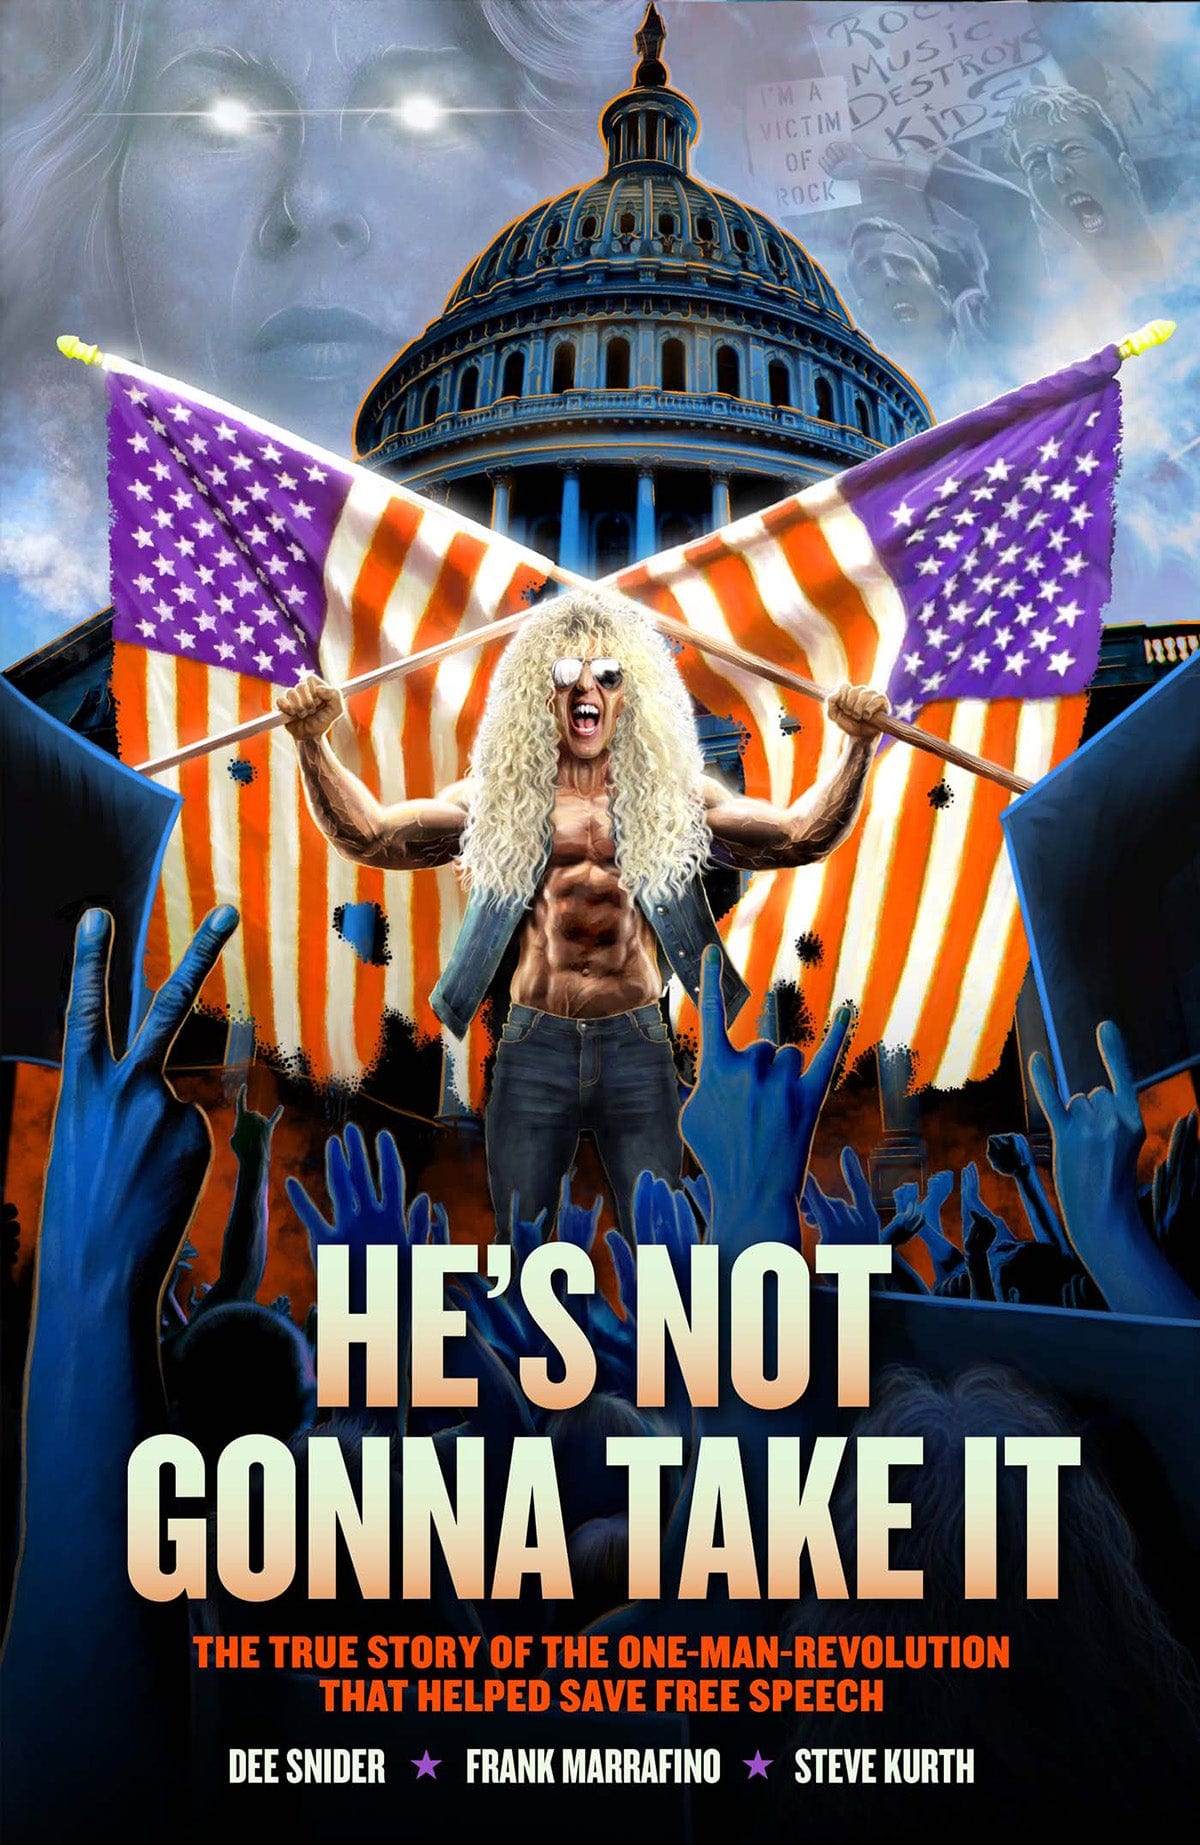 DEE SNIDER TP HES NOT GONNA TAKE IT - Third Eye